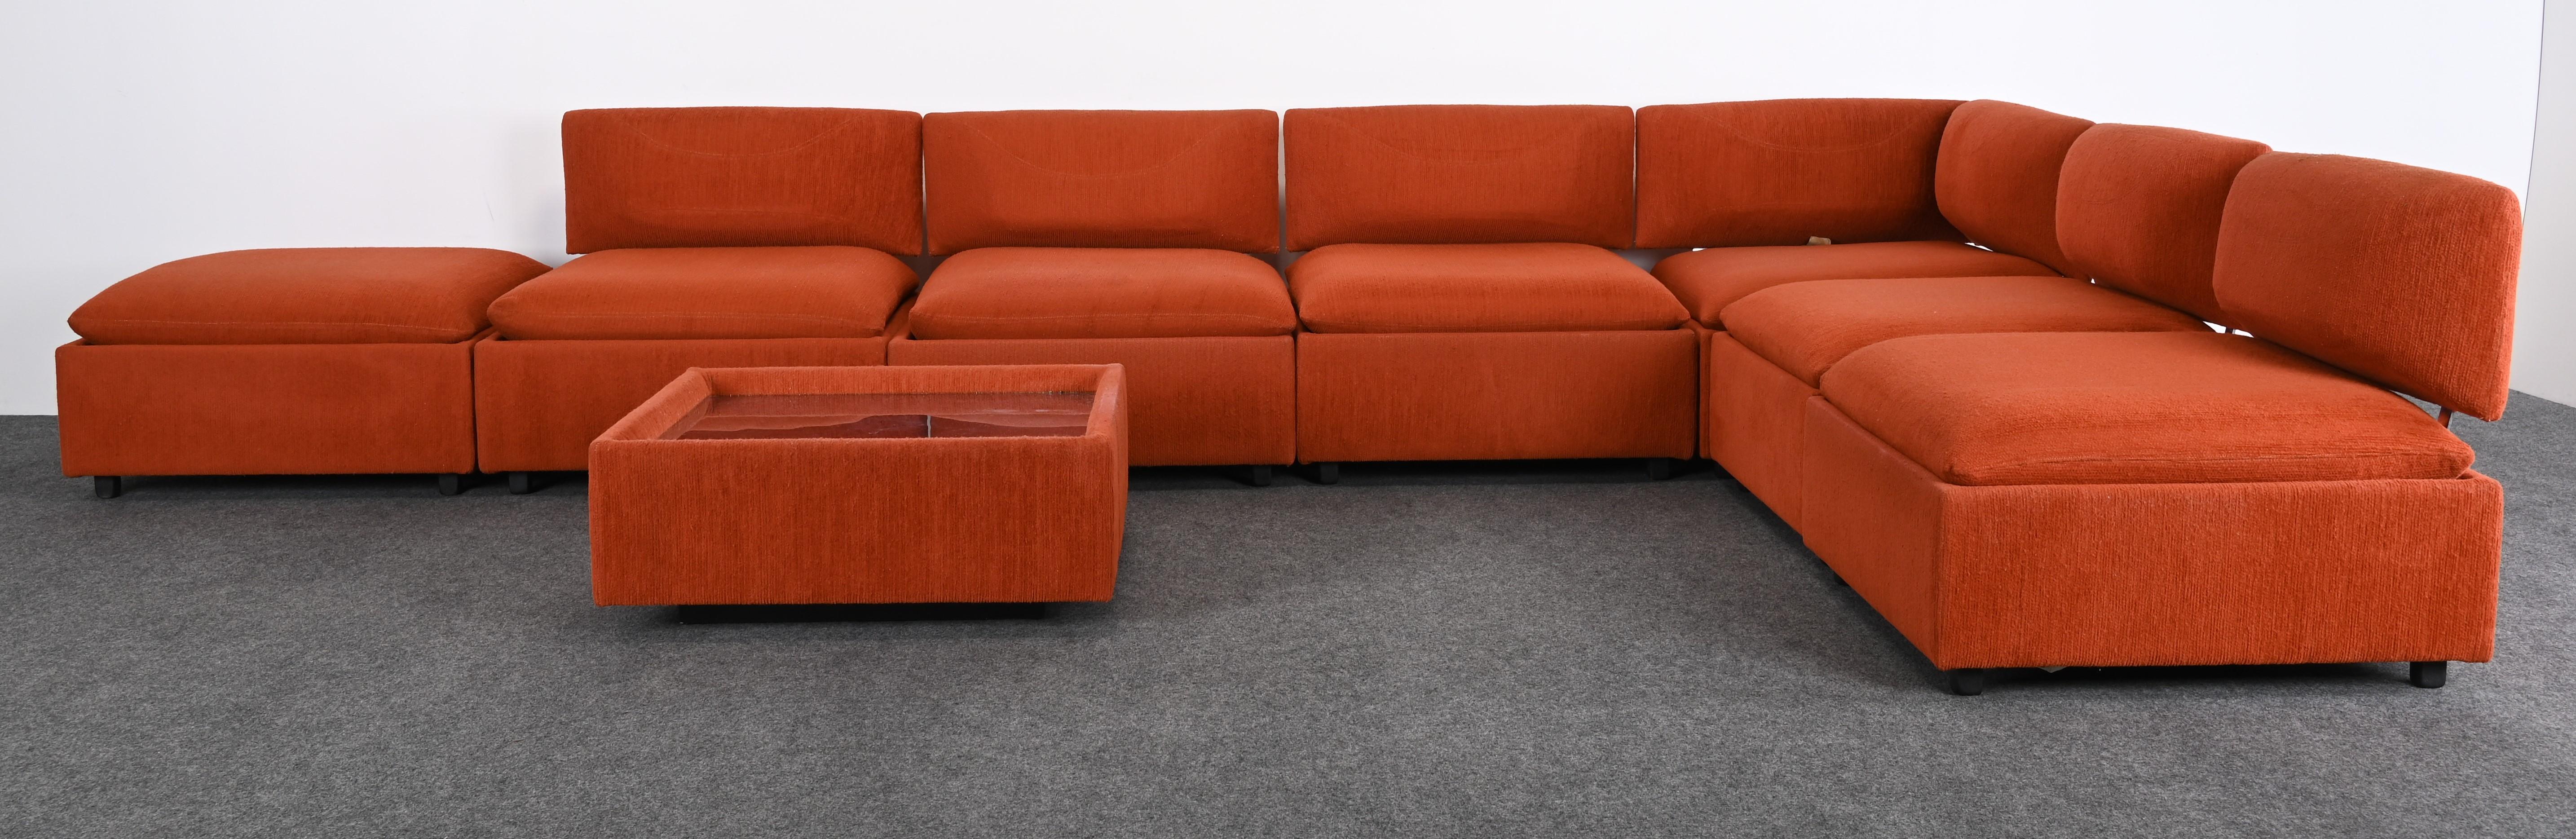 A rare hard-to-find monumental vintage eight-sectional sofa set by Adrian Pearsall for Craft. This 1970s-era sofa would work great in any Mid-Century Modern or Contemporary home. The versatile sofa can be configured in multiple ways. The sectional